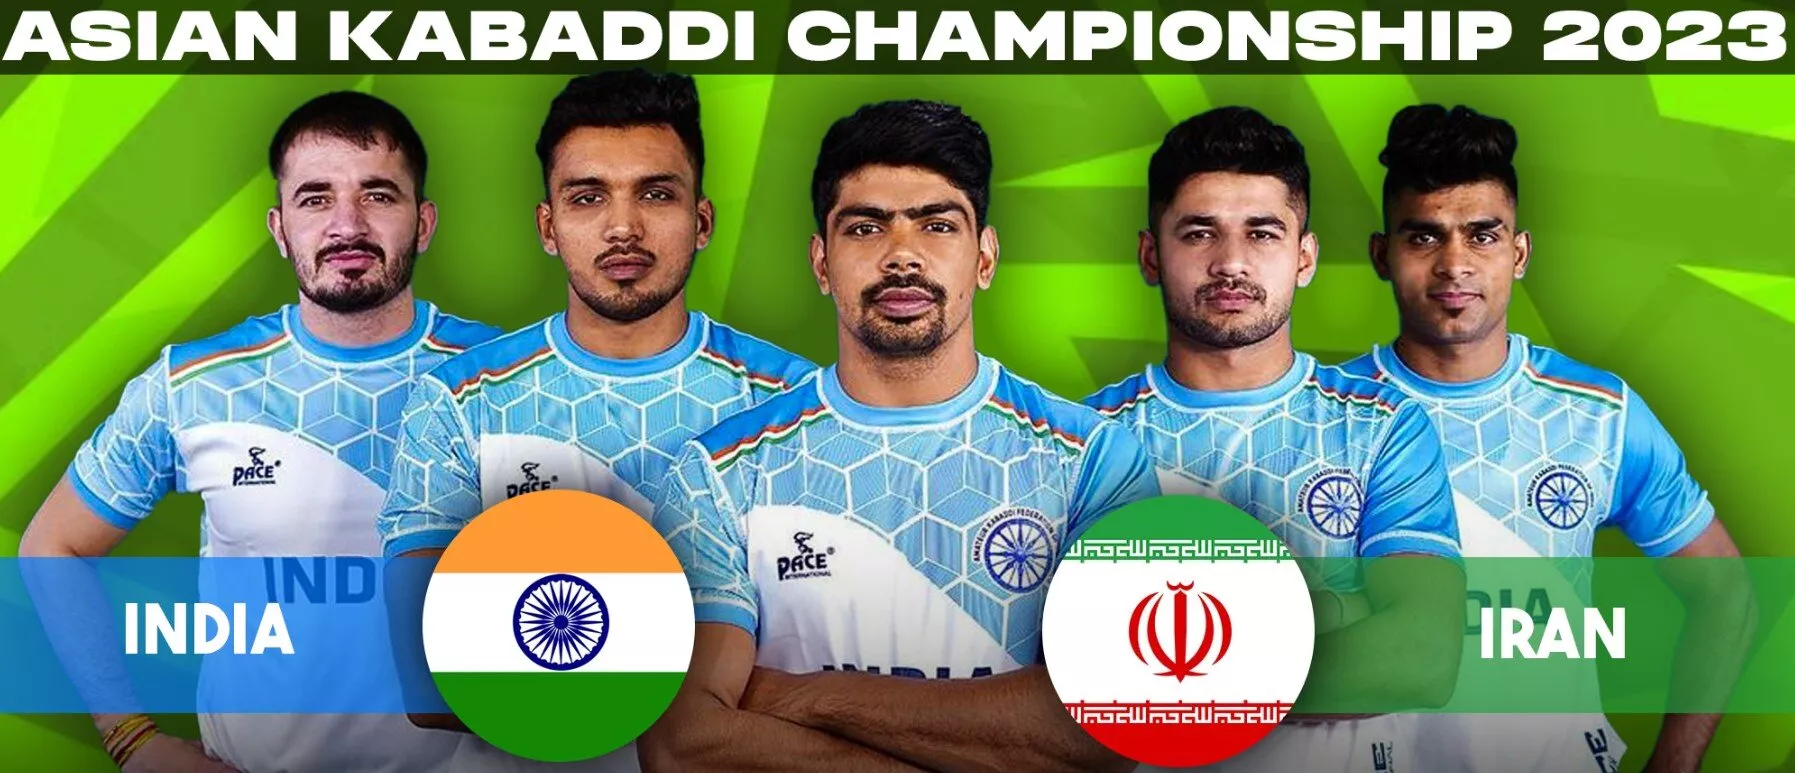 Asian Kabaddi Championship 2023: India will face arch-rival Iran to go to top of points table